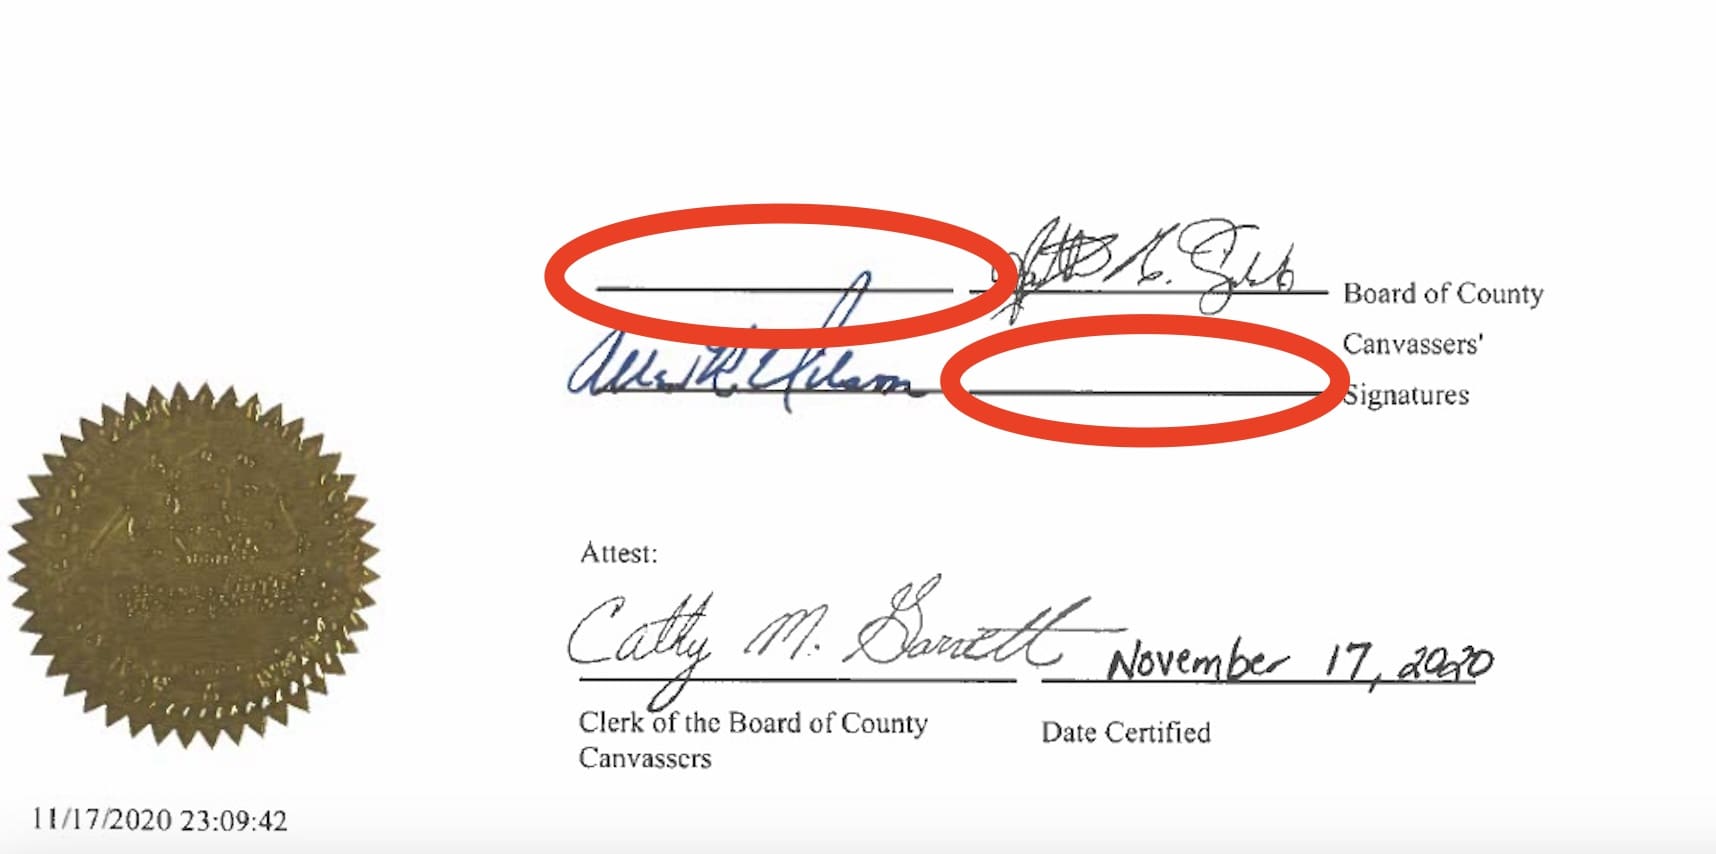 WOW! NEWLY OBTAINED Evidence Shows Key Signatures Are MISSING on Wayne County's 2020 General Election Certification | The Gateway Pundit